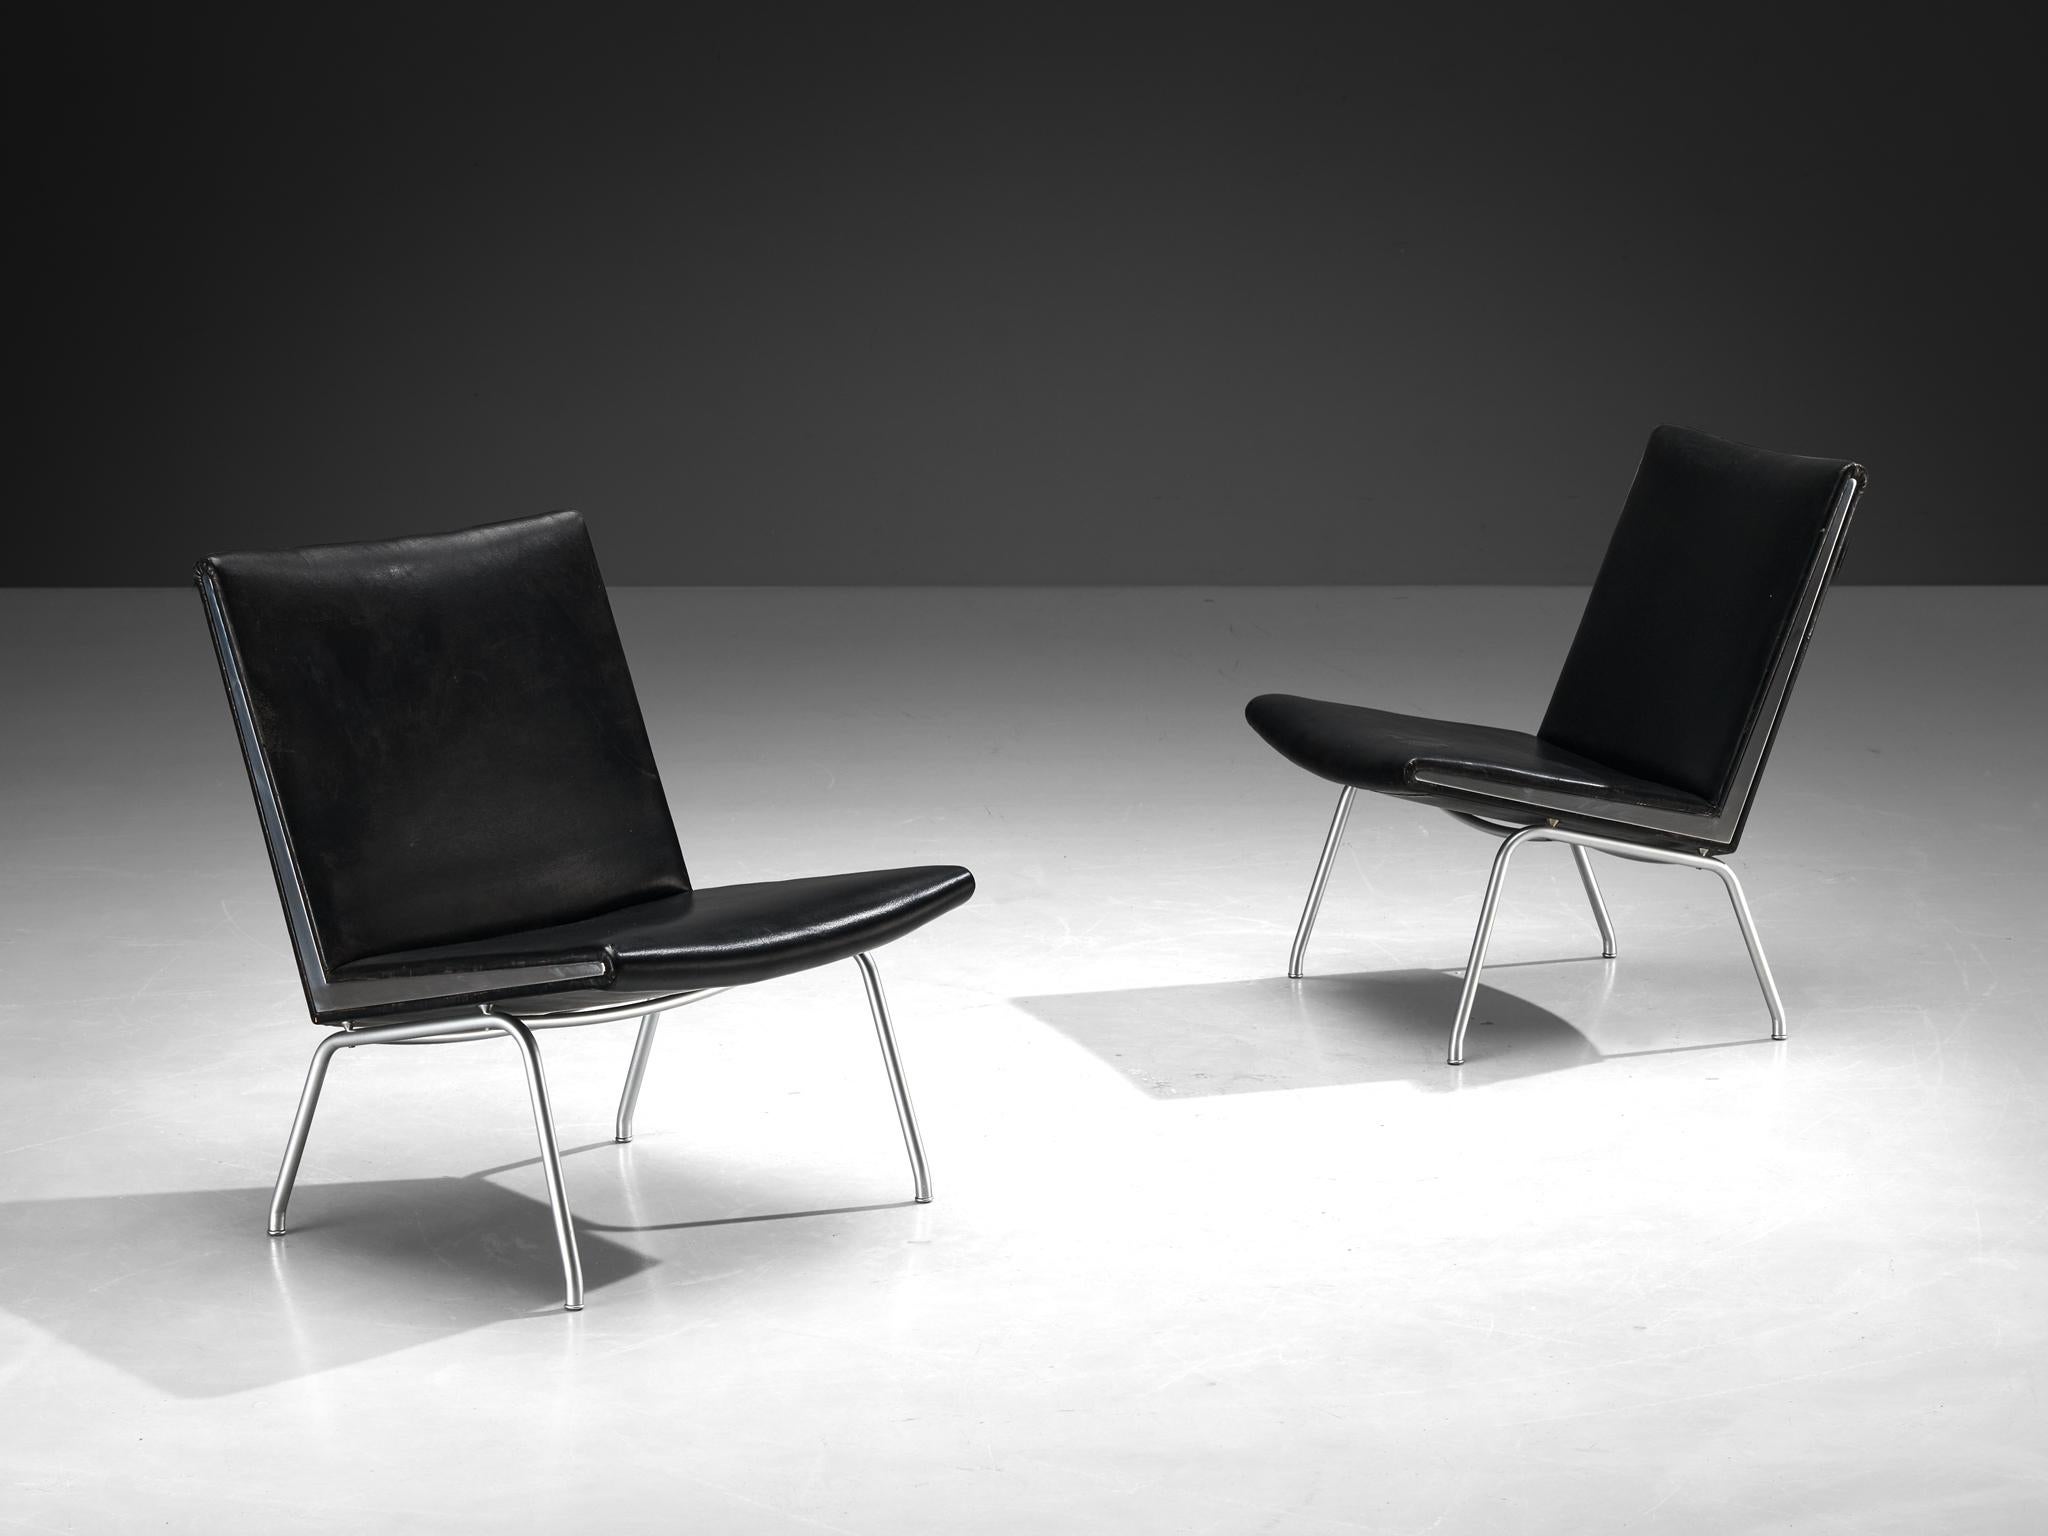 Hans J. Wegner for A.P. Stolen, pair of 'Airport' lounge chairs, leather, steel, Denmark, 1958

This pair of Airport chairs are designed by icon Hans Wegner in 1958. The design was not specifically meant to furnish airports, but is named after the